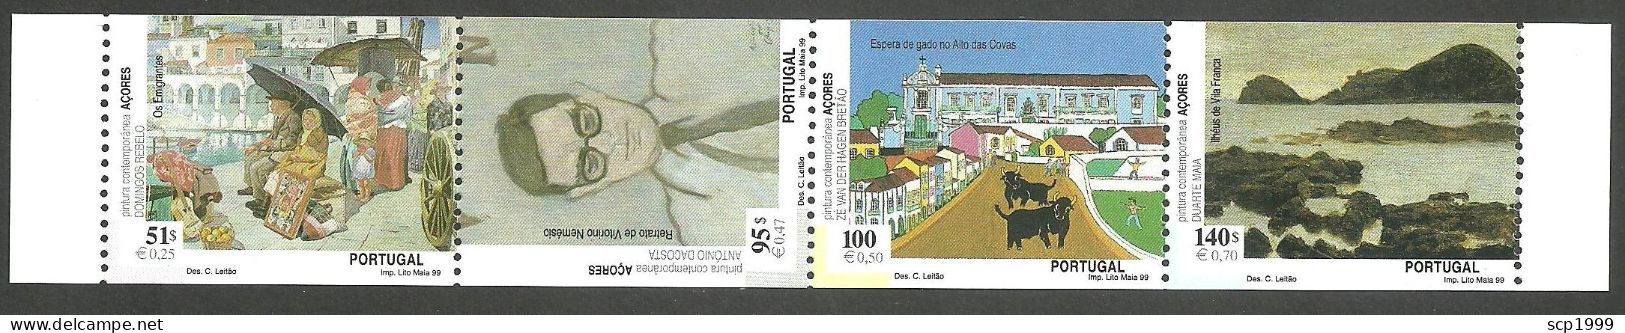 Portugal 1999 - Azores Paintings Booklet MNH - Markenheftchen